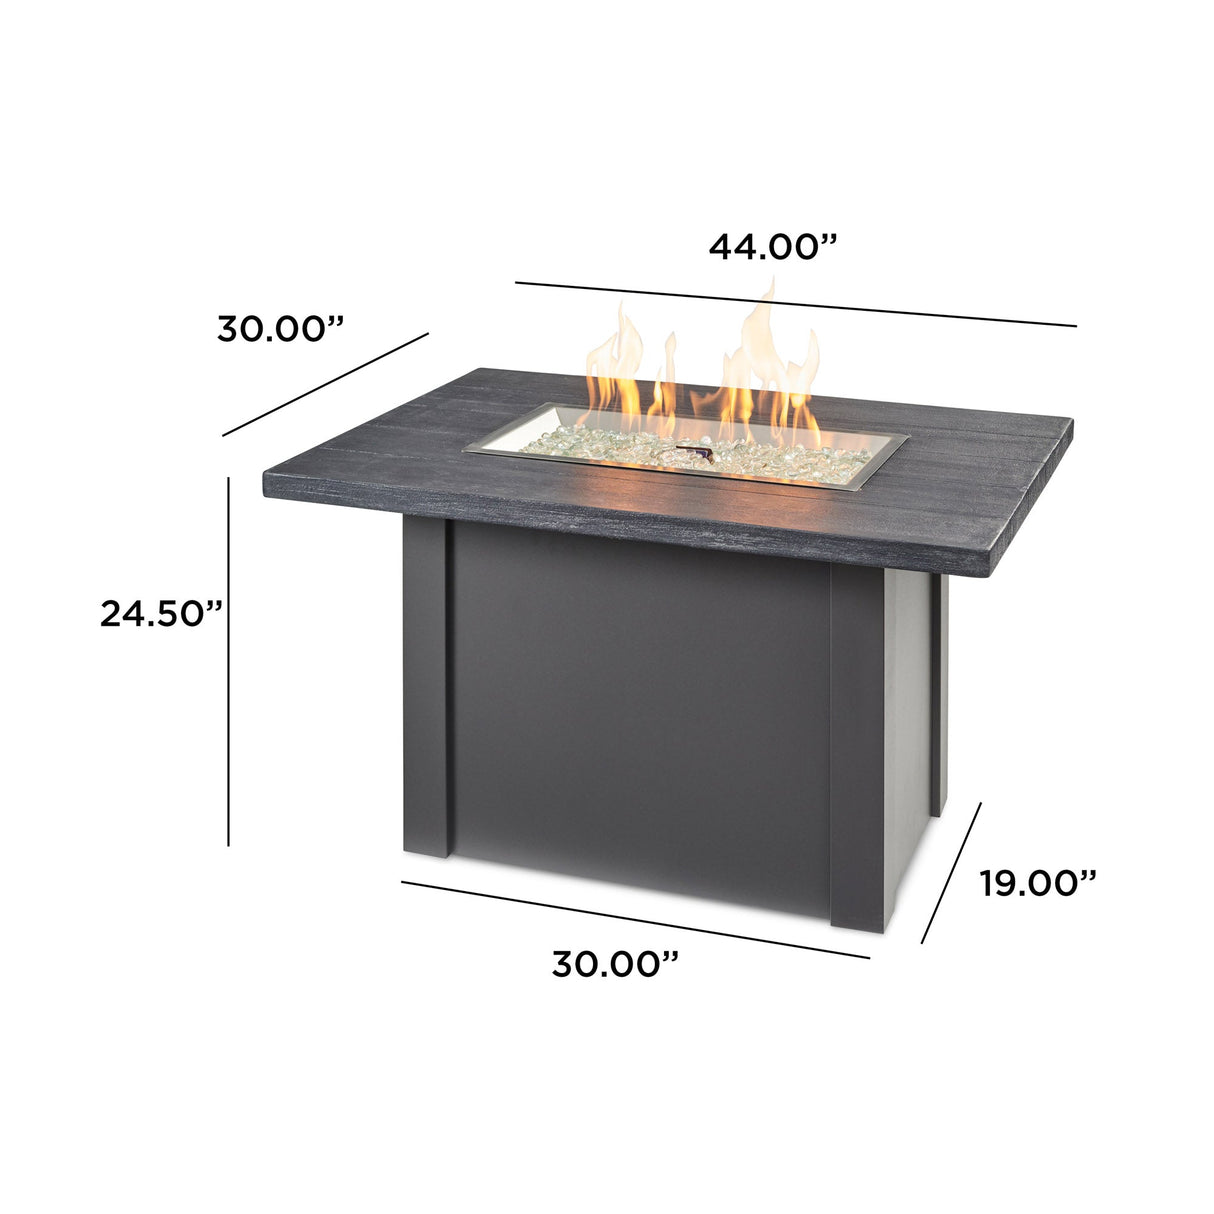 Dimensions overlaid on the Havenwood Rectangular Gas Fire Pit Table with a Carbon Grey top and Graphite Grey base